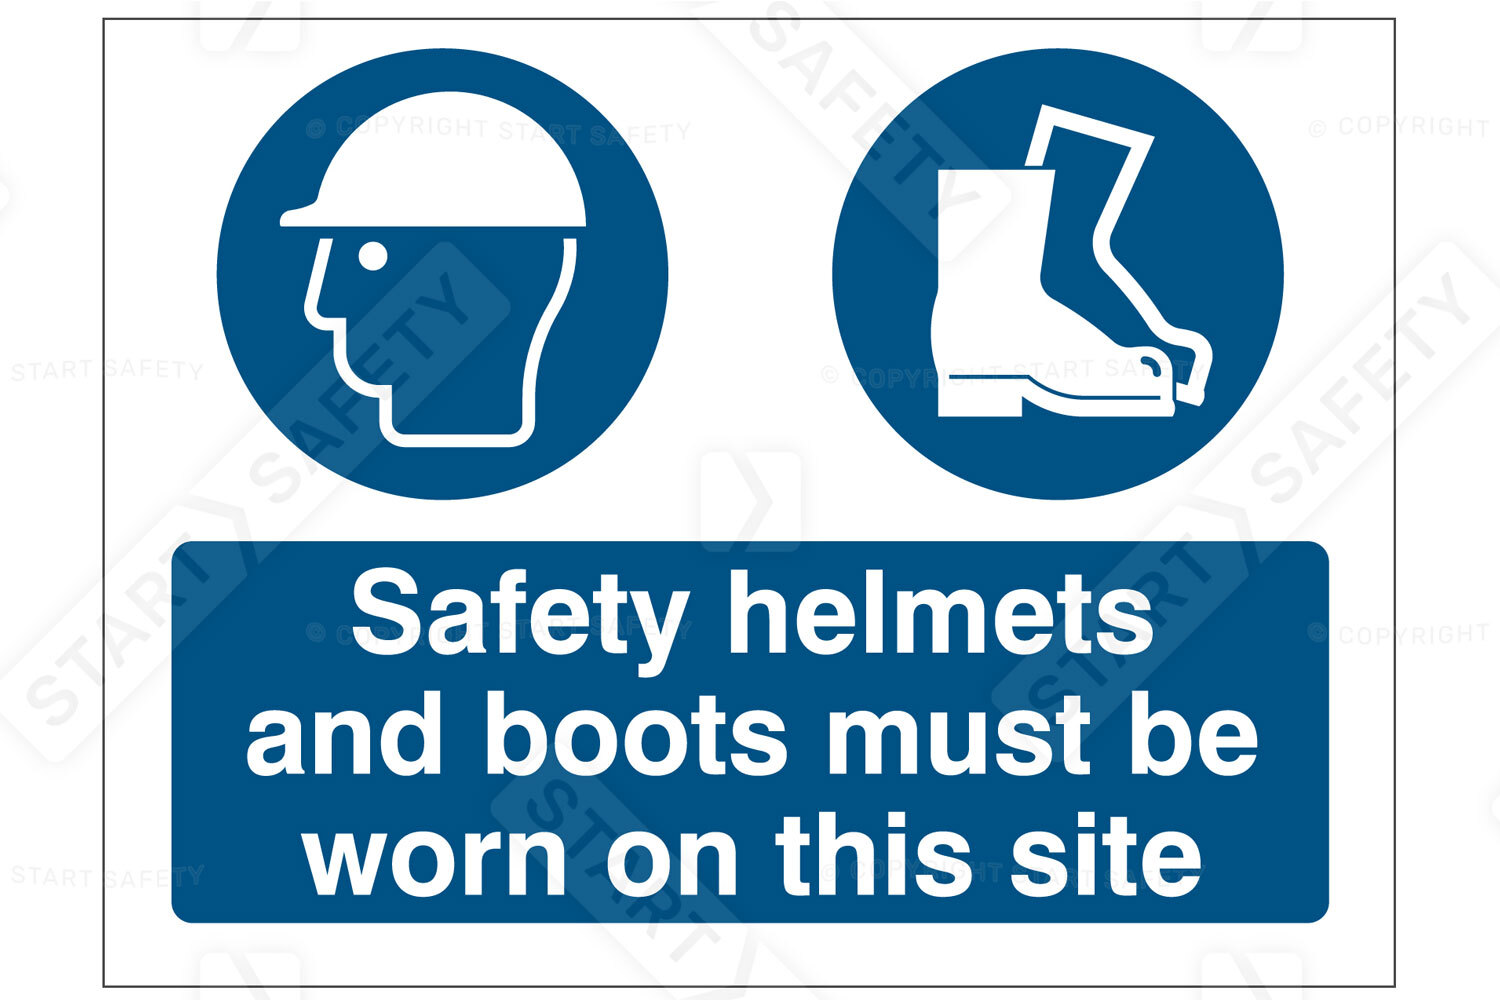 Sign stating that Safety helmets and boots must be worn on site